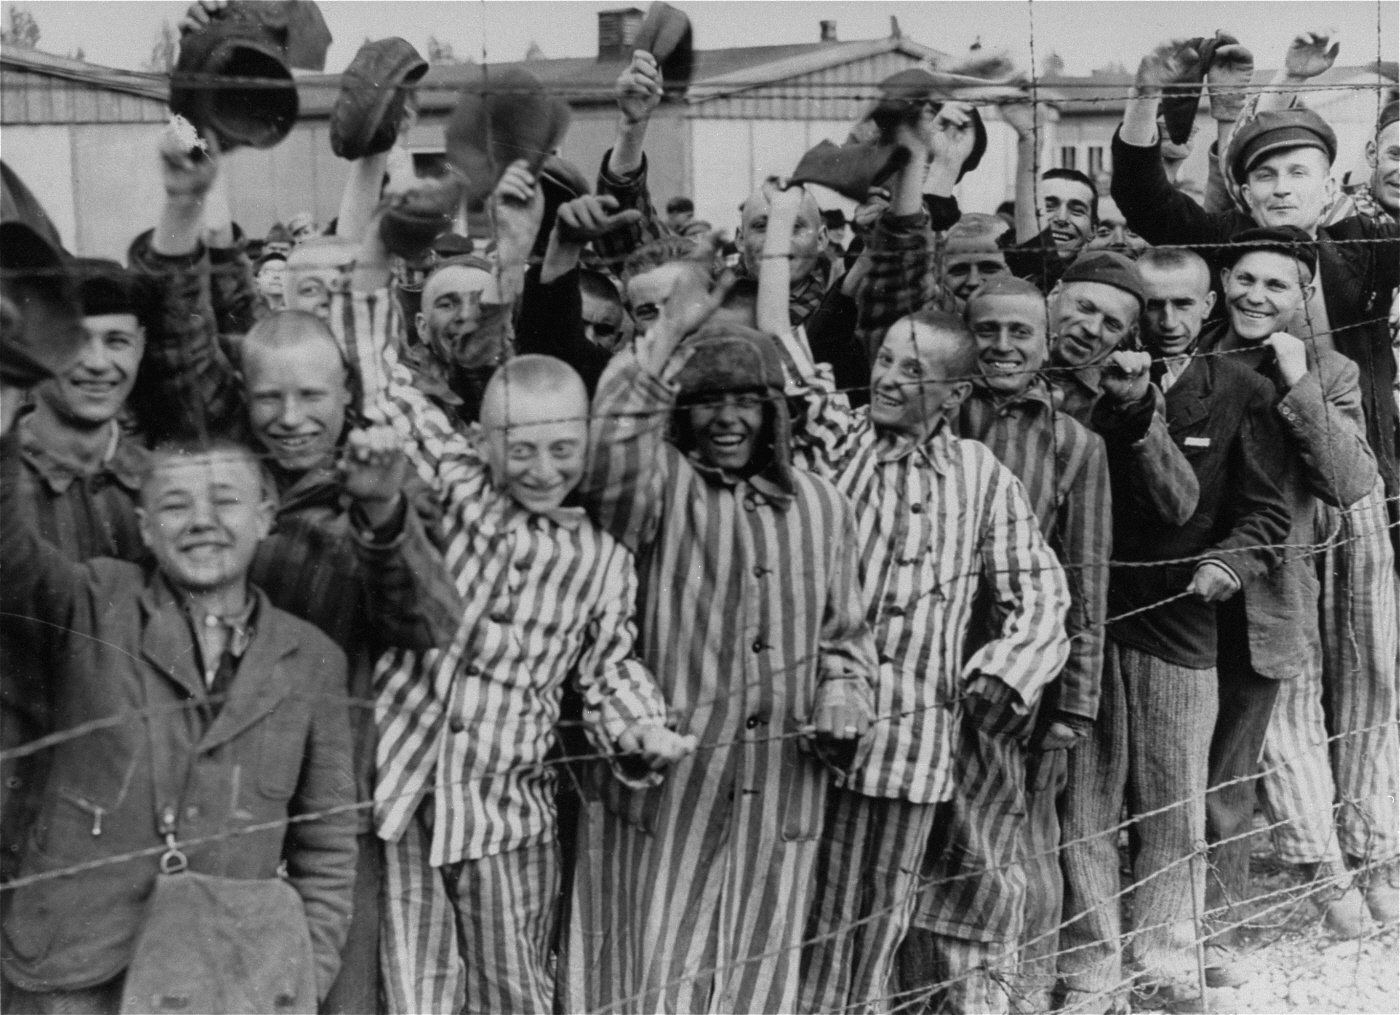 Young and old survivors in Dachau cheer approaching U.S. troops.